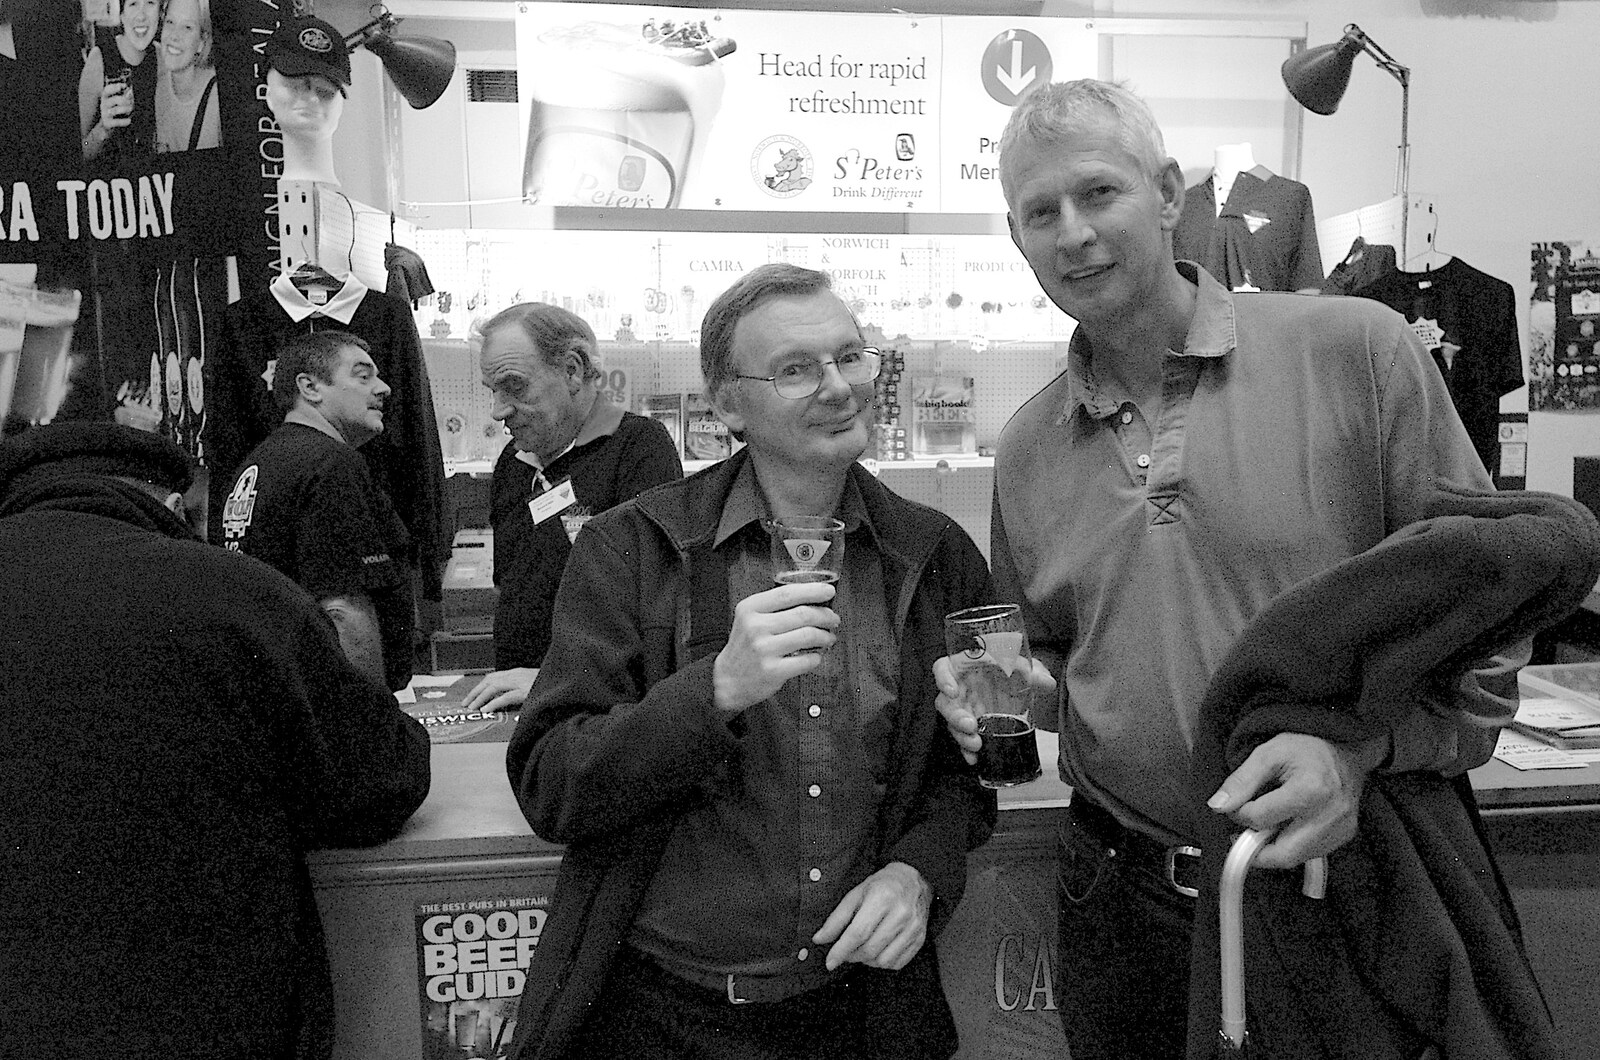 Ping-Pong Peter and his mate from The CAMRA Norwich Beer Festival, St. Andrew's Hall, Norwich - 25th October 2006